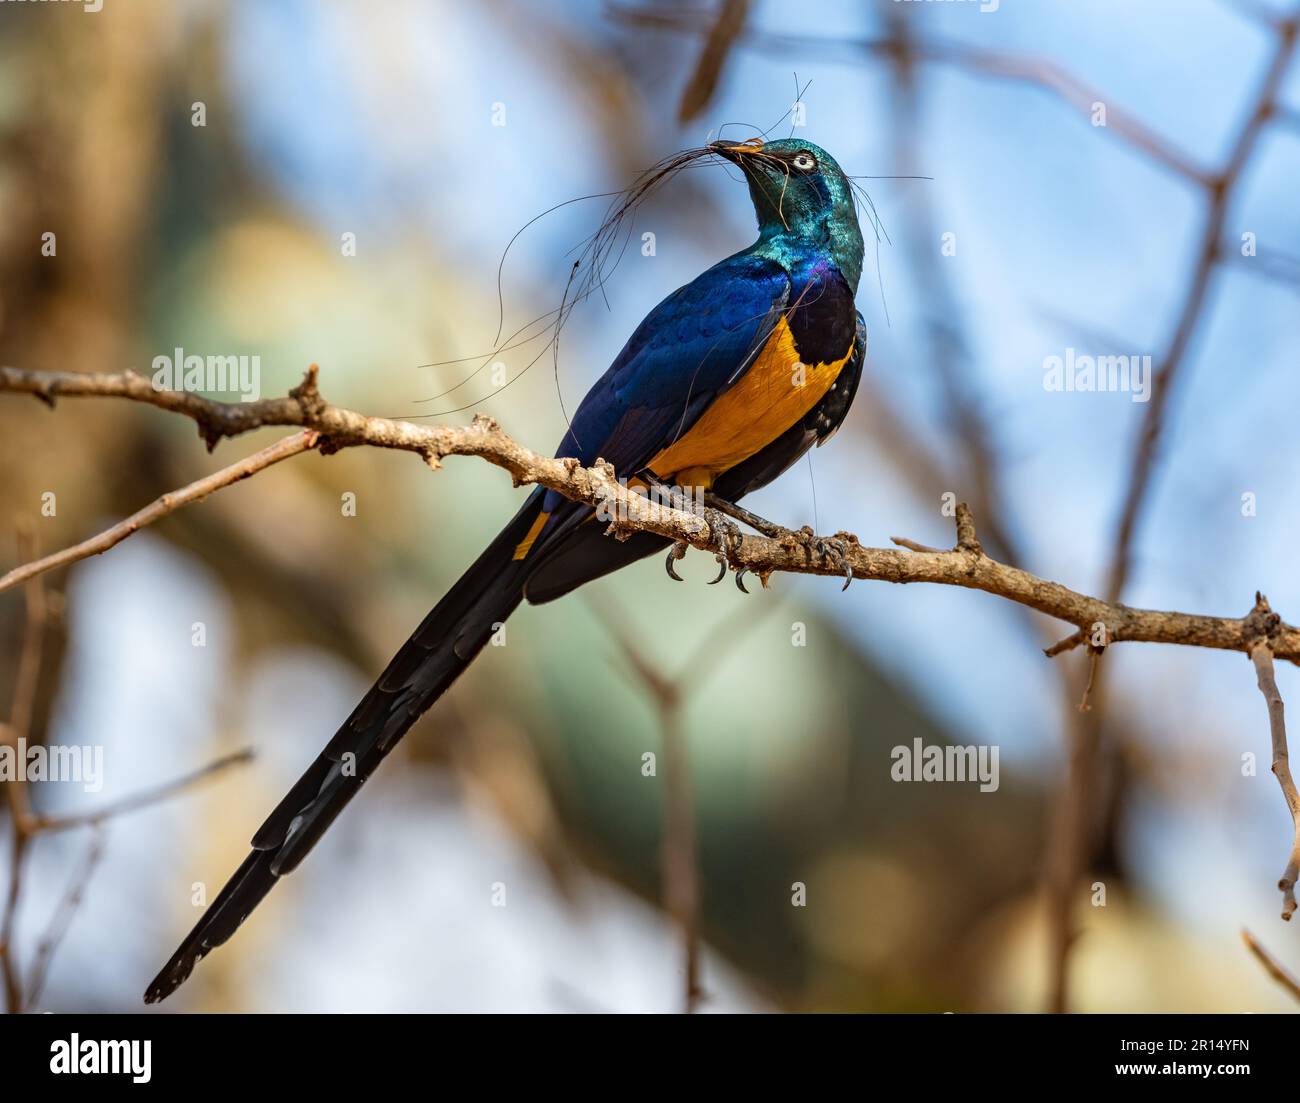 A colorful Golden-breasted Starling (Lamprotornis regius) perched on a branch with nesting material. Kenya, Africa. Stock Photo